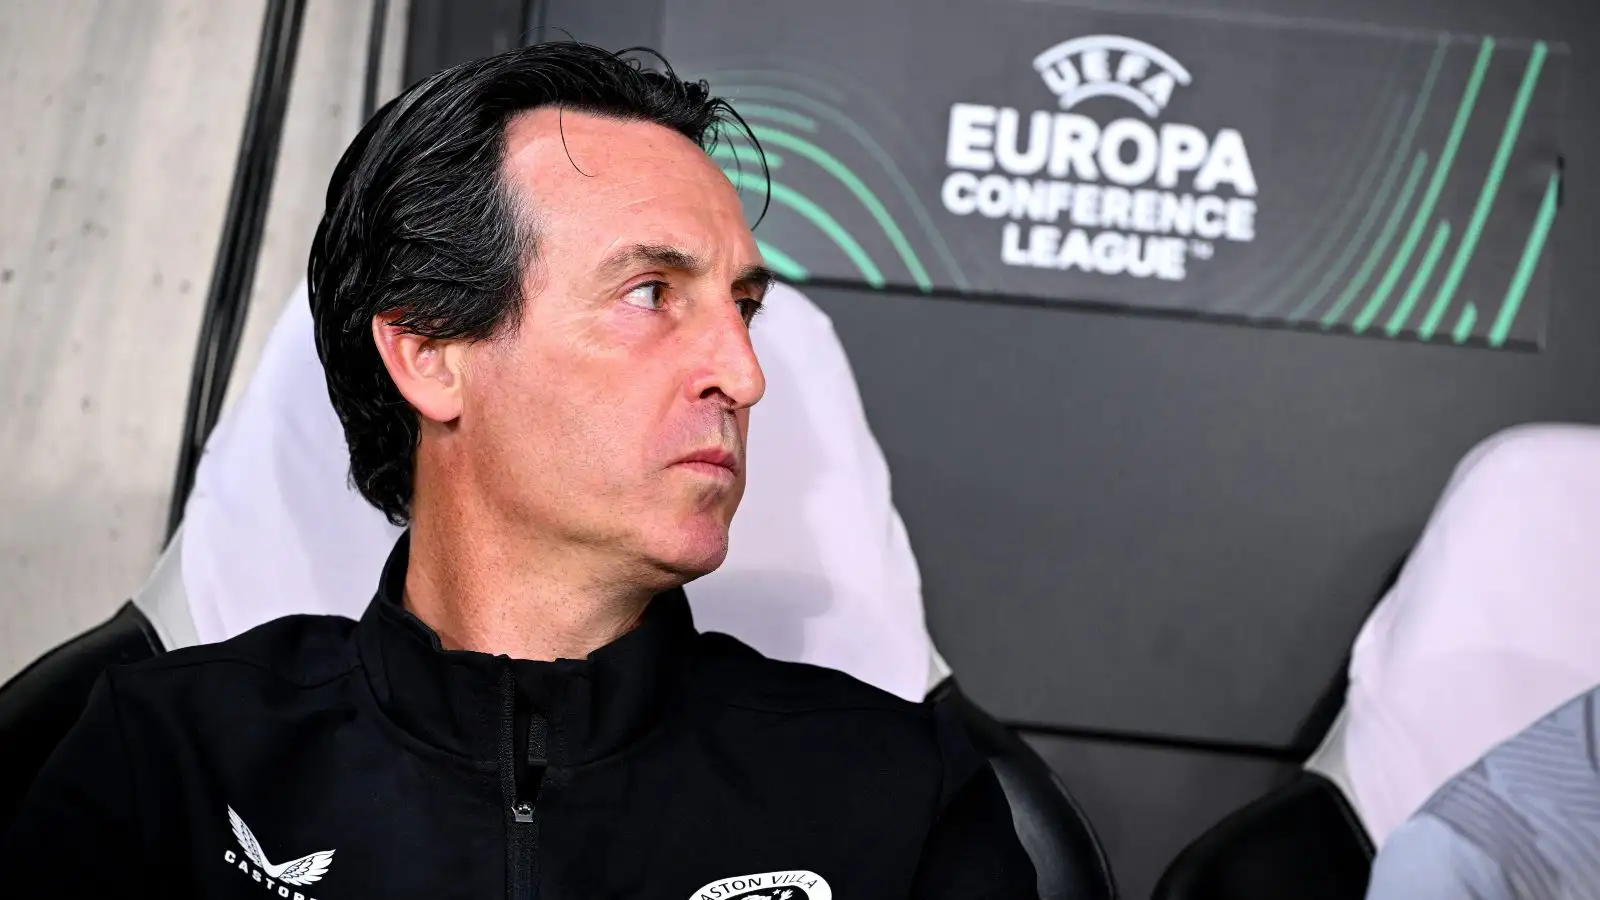 Aston Suite head train Unai Emery sat on the seat before a Europa Conference League match.